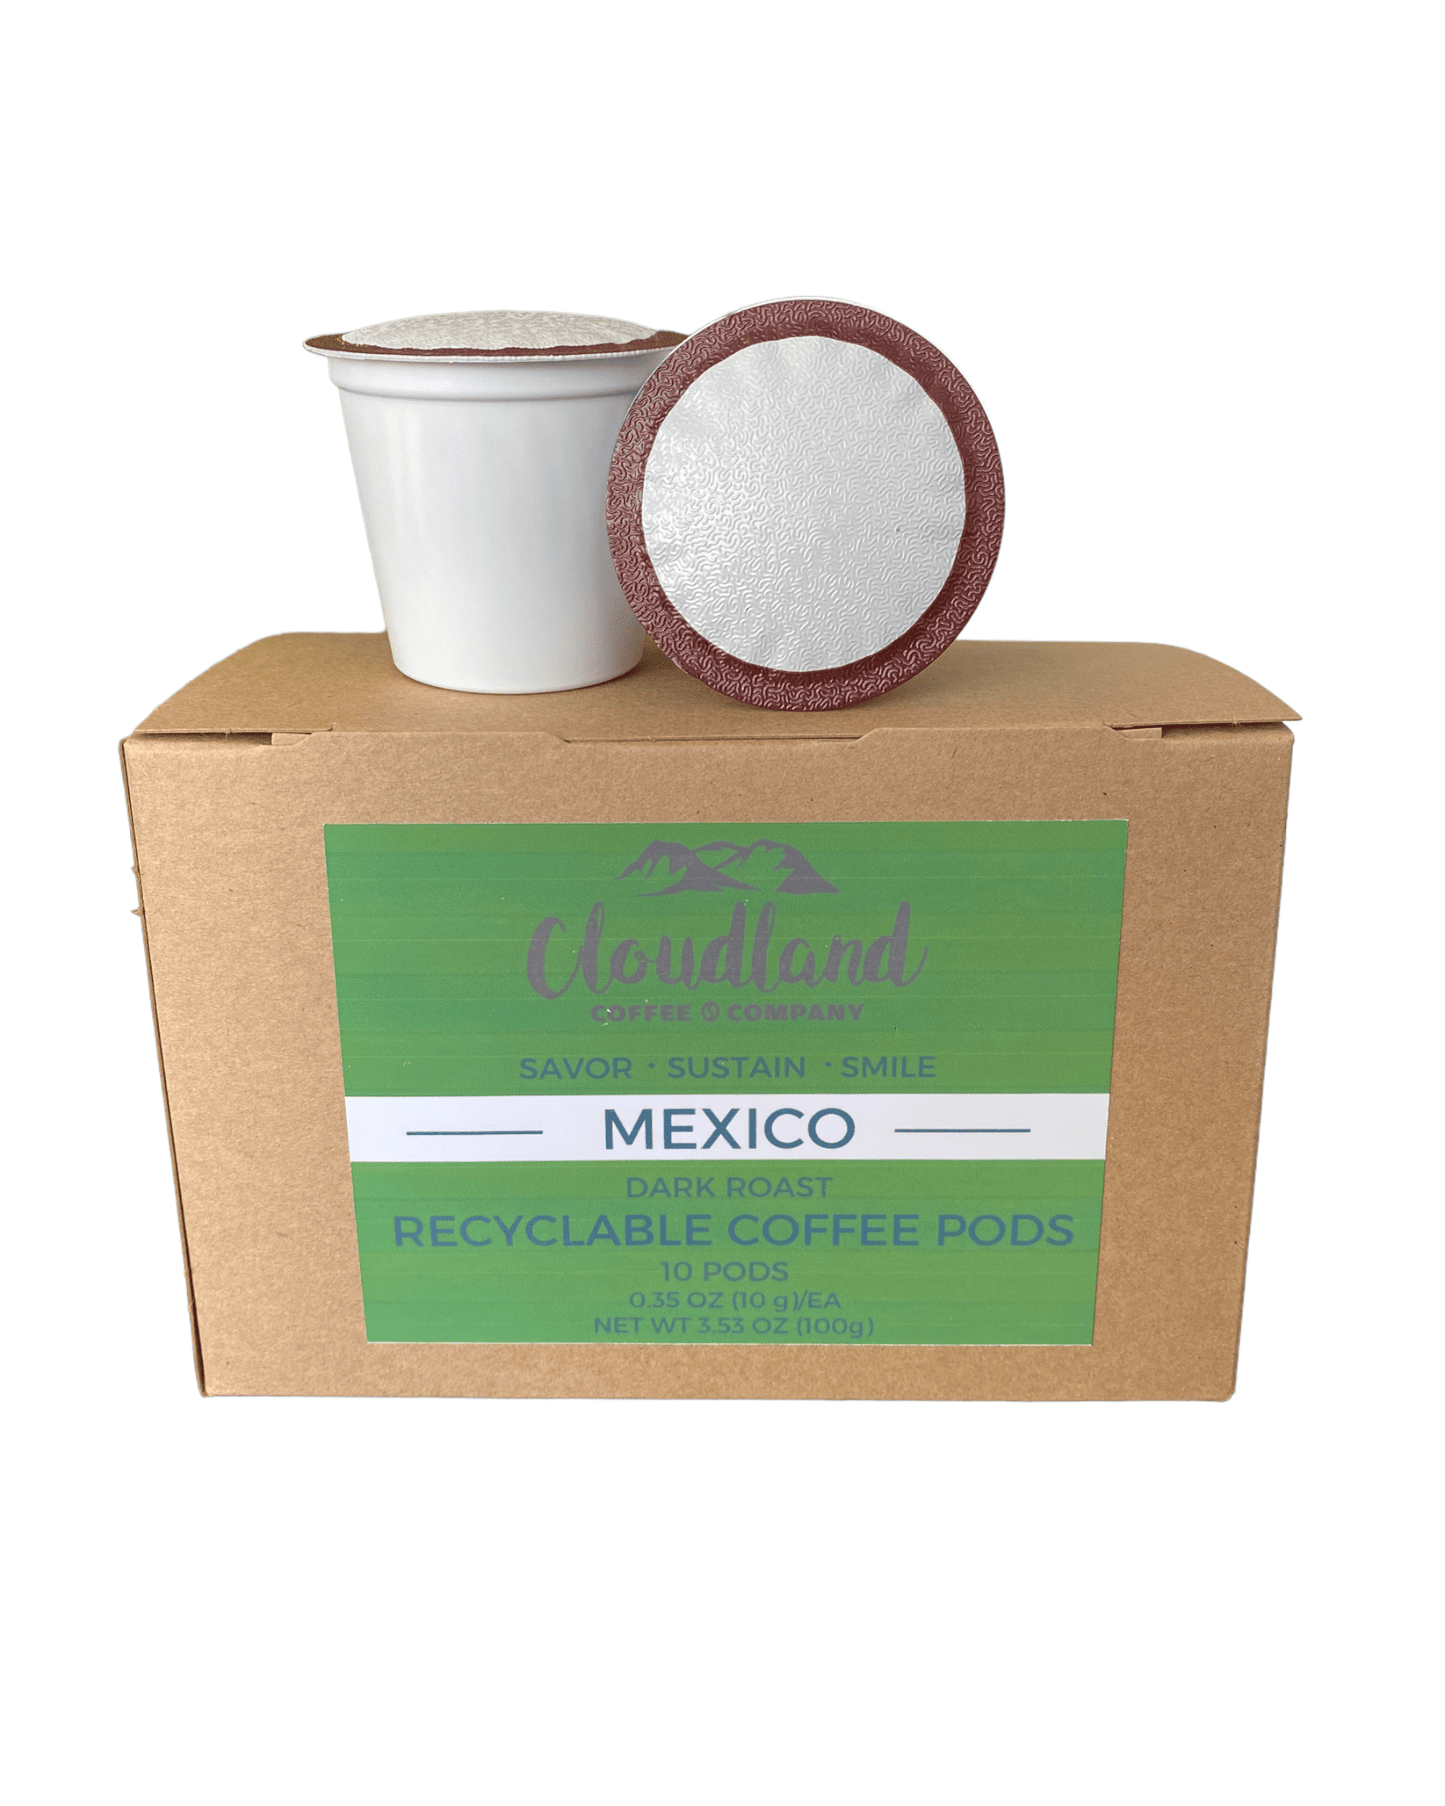 Mexico Recyclable Coffee Pods